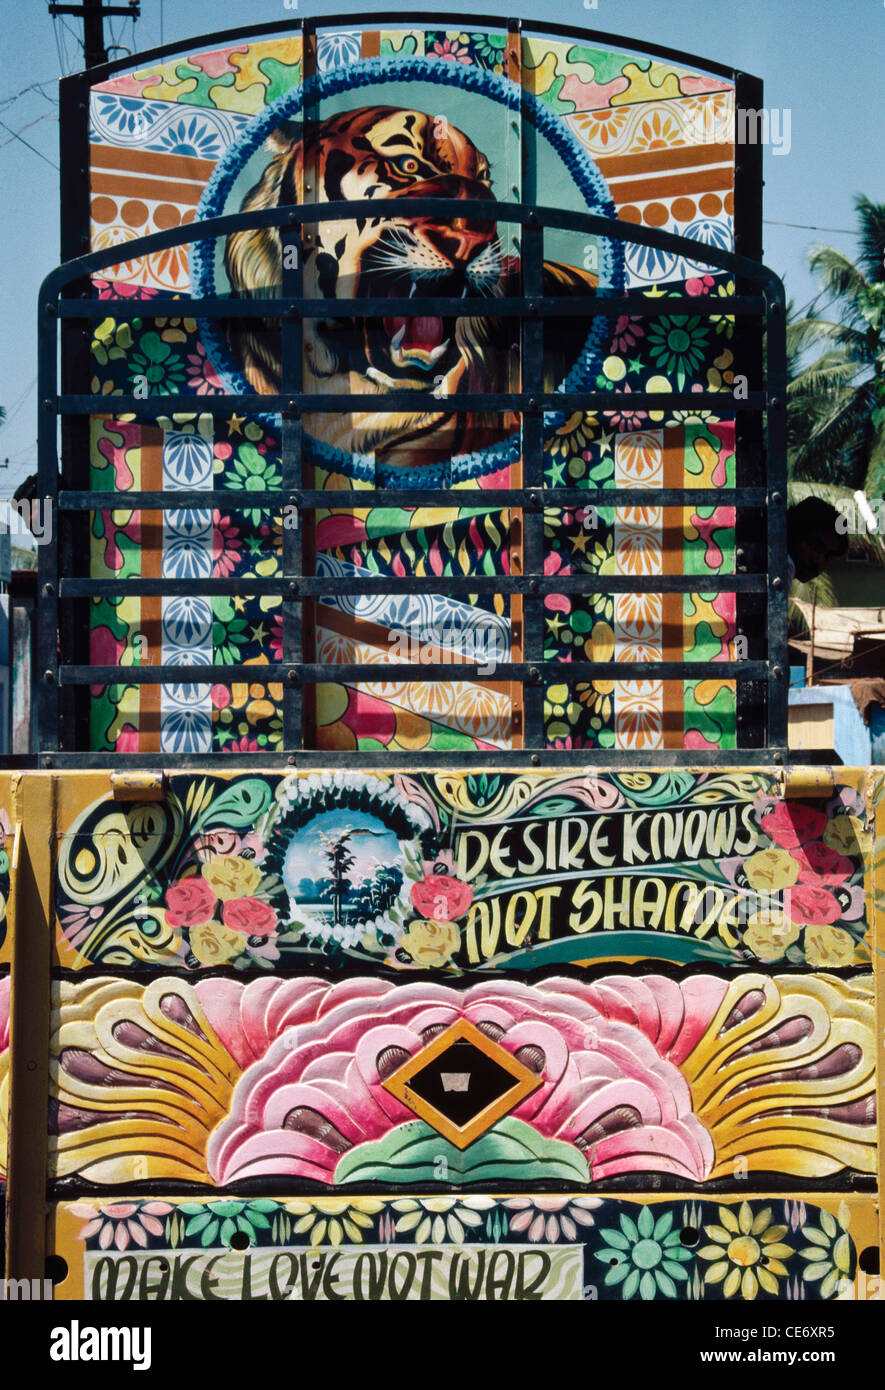 indian painted truck sign desire knows not shame grafitti make love not war kerala india Stock Photo